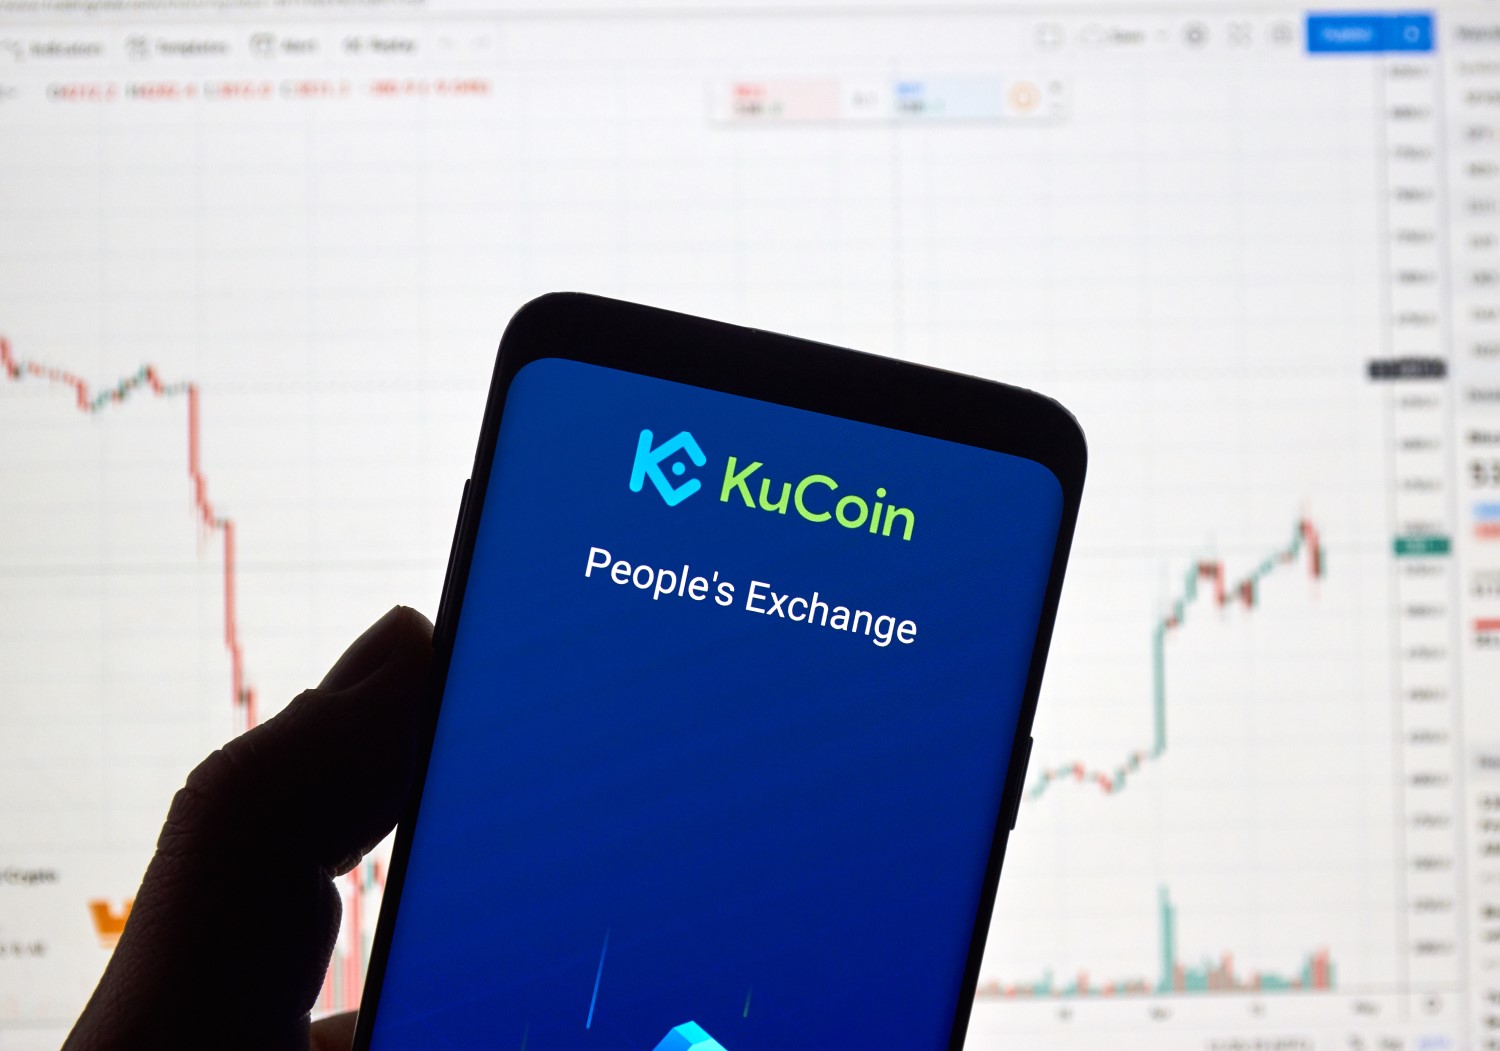 Find detailed information about KuCoin